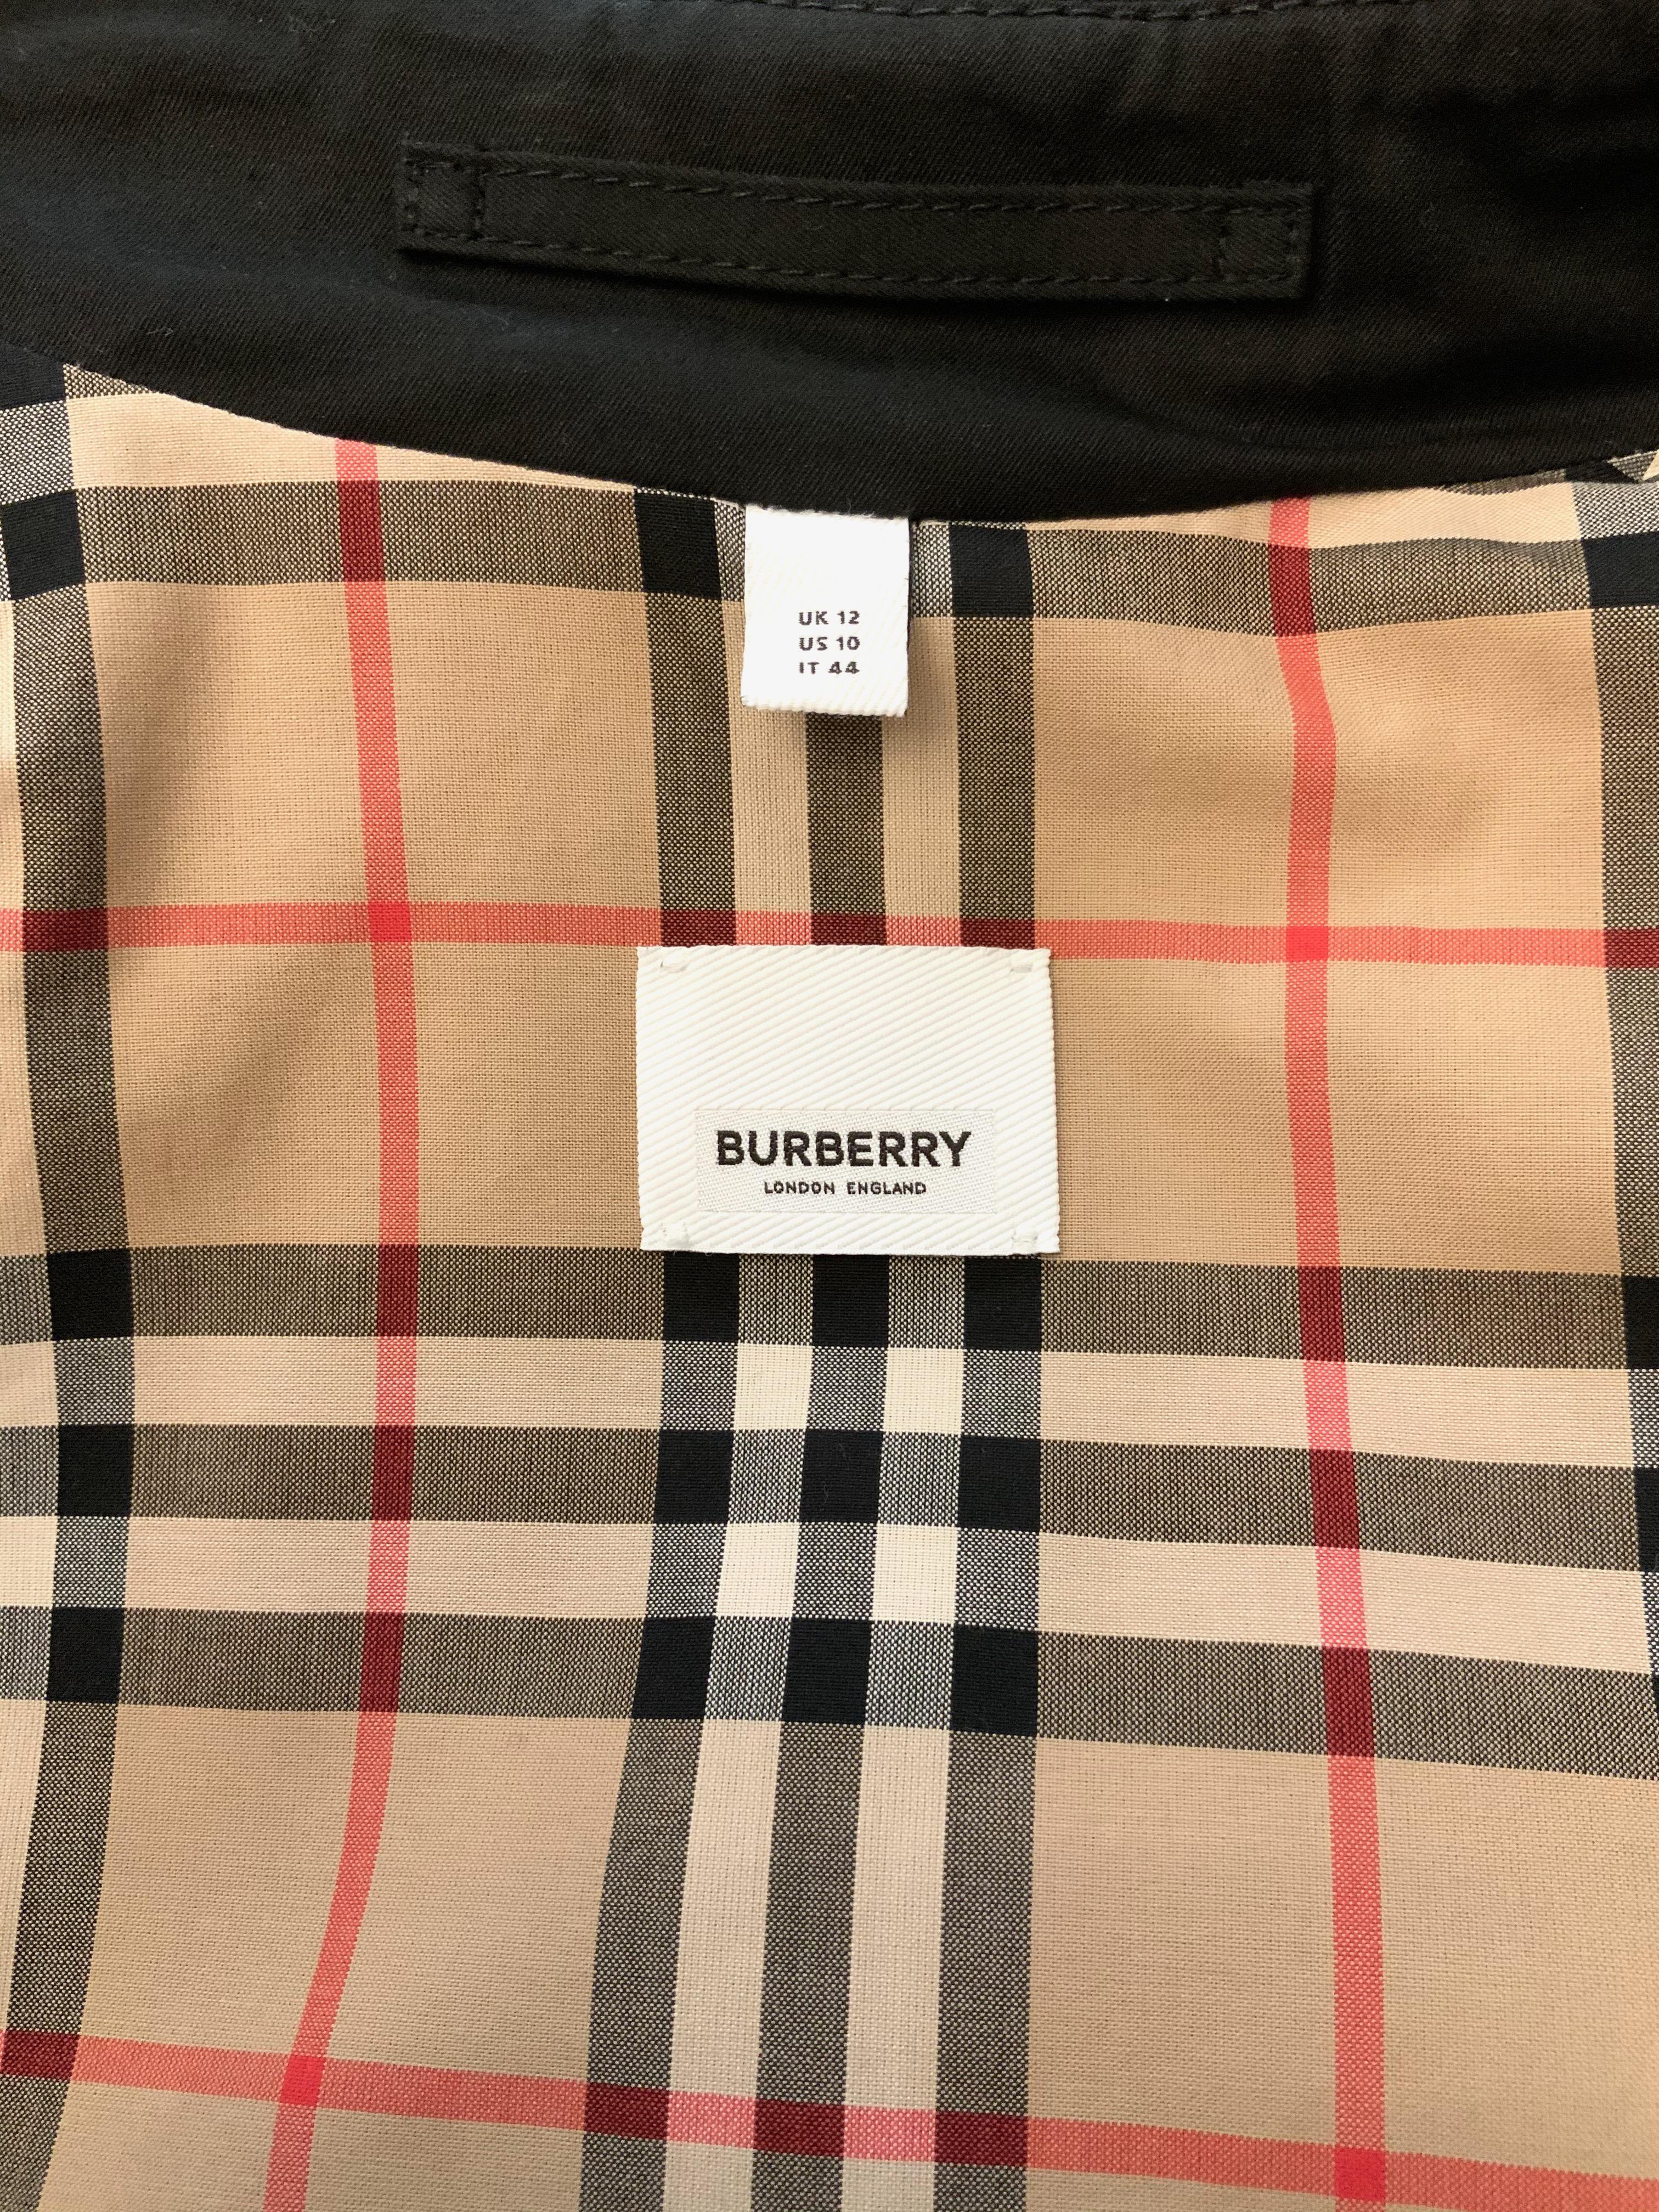 Burberry Two-Tone Black and Beige Trench Coat 5